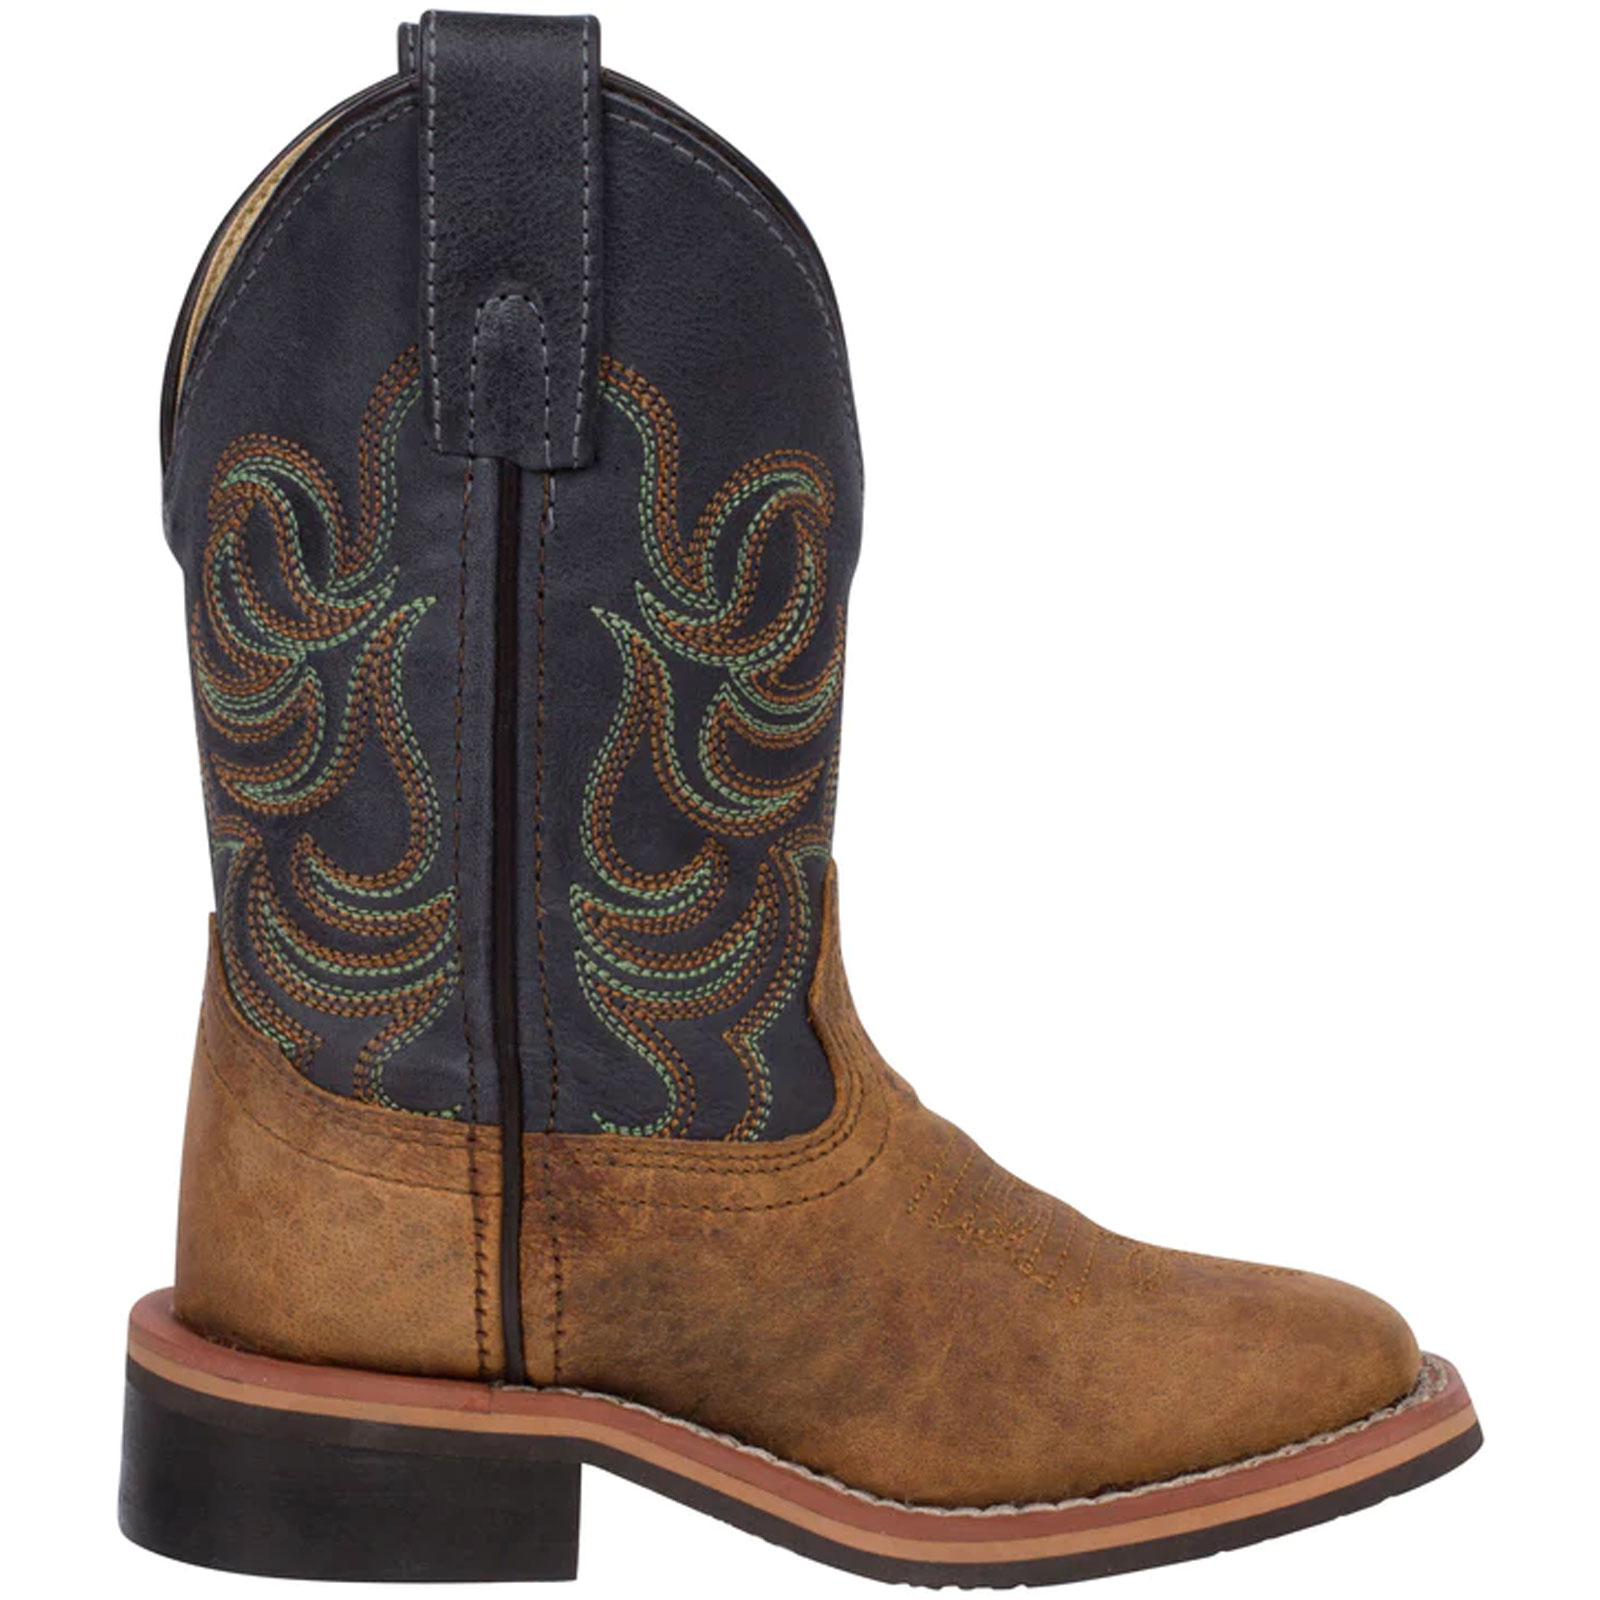 SMOKY MOUNTAIN BOOTS Kids Jesse Western Boots, Color: Brown/Navy, Size: 1, Width: R (3749C-1R) - image 3 of 6